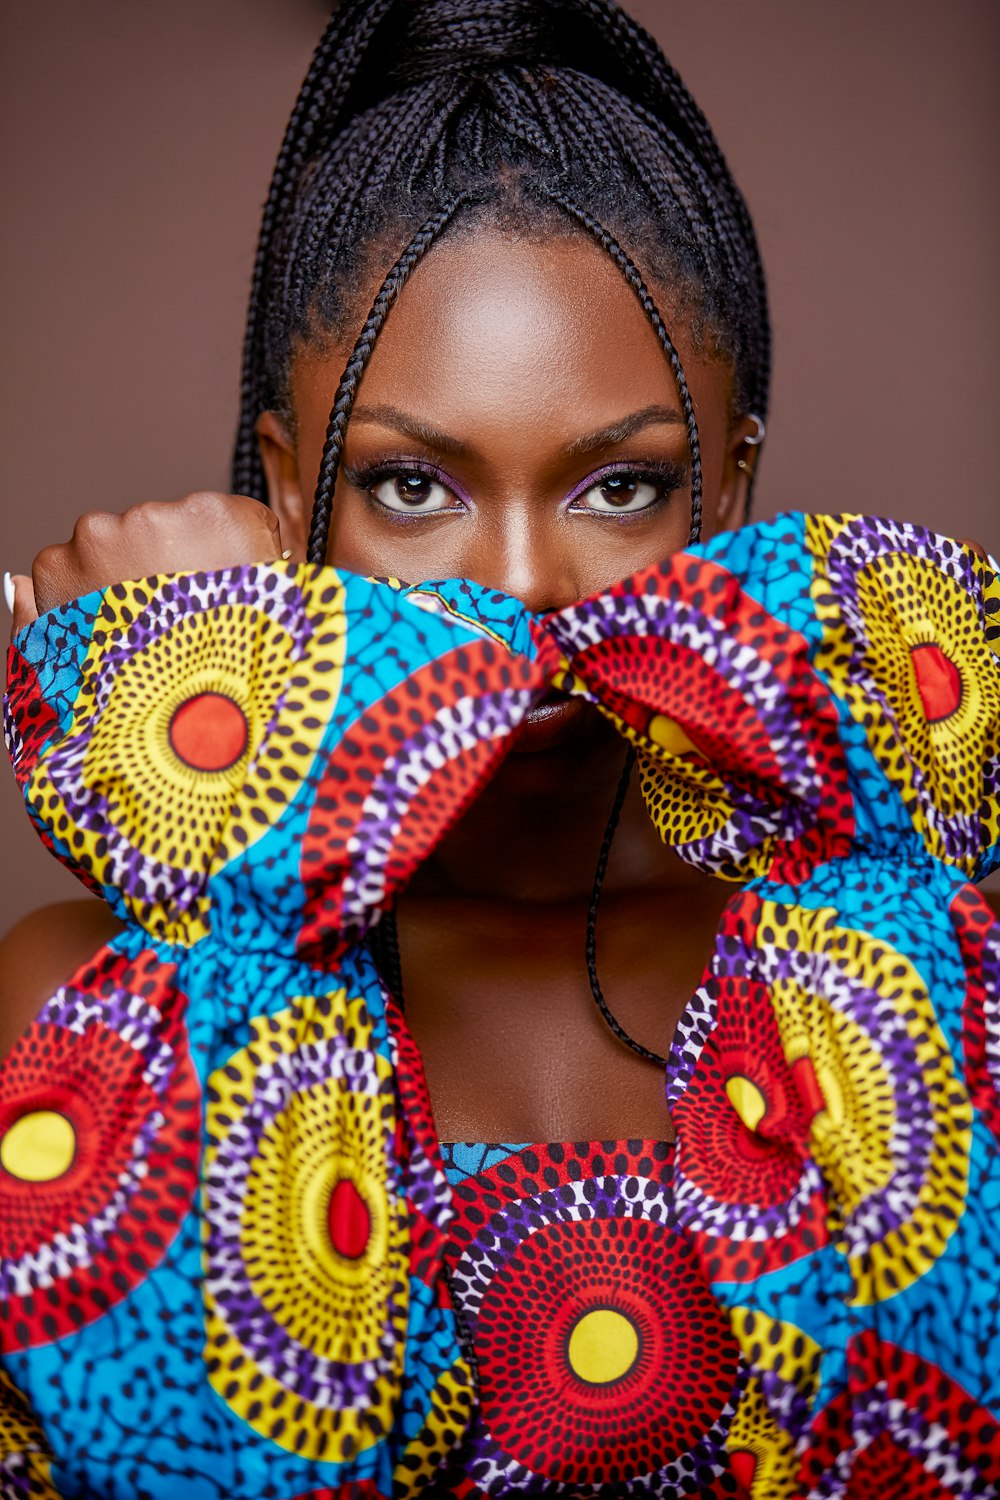 a woman with braids holding a colorful cloth over her face